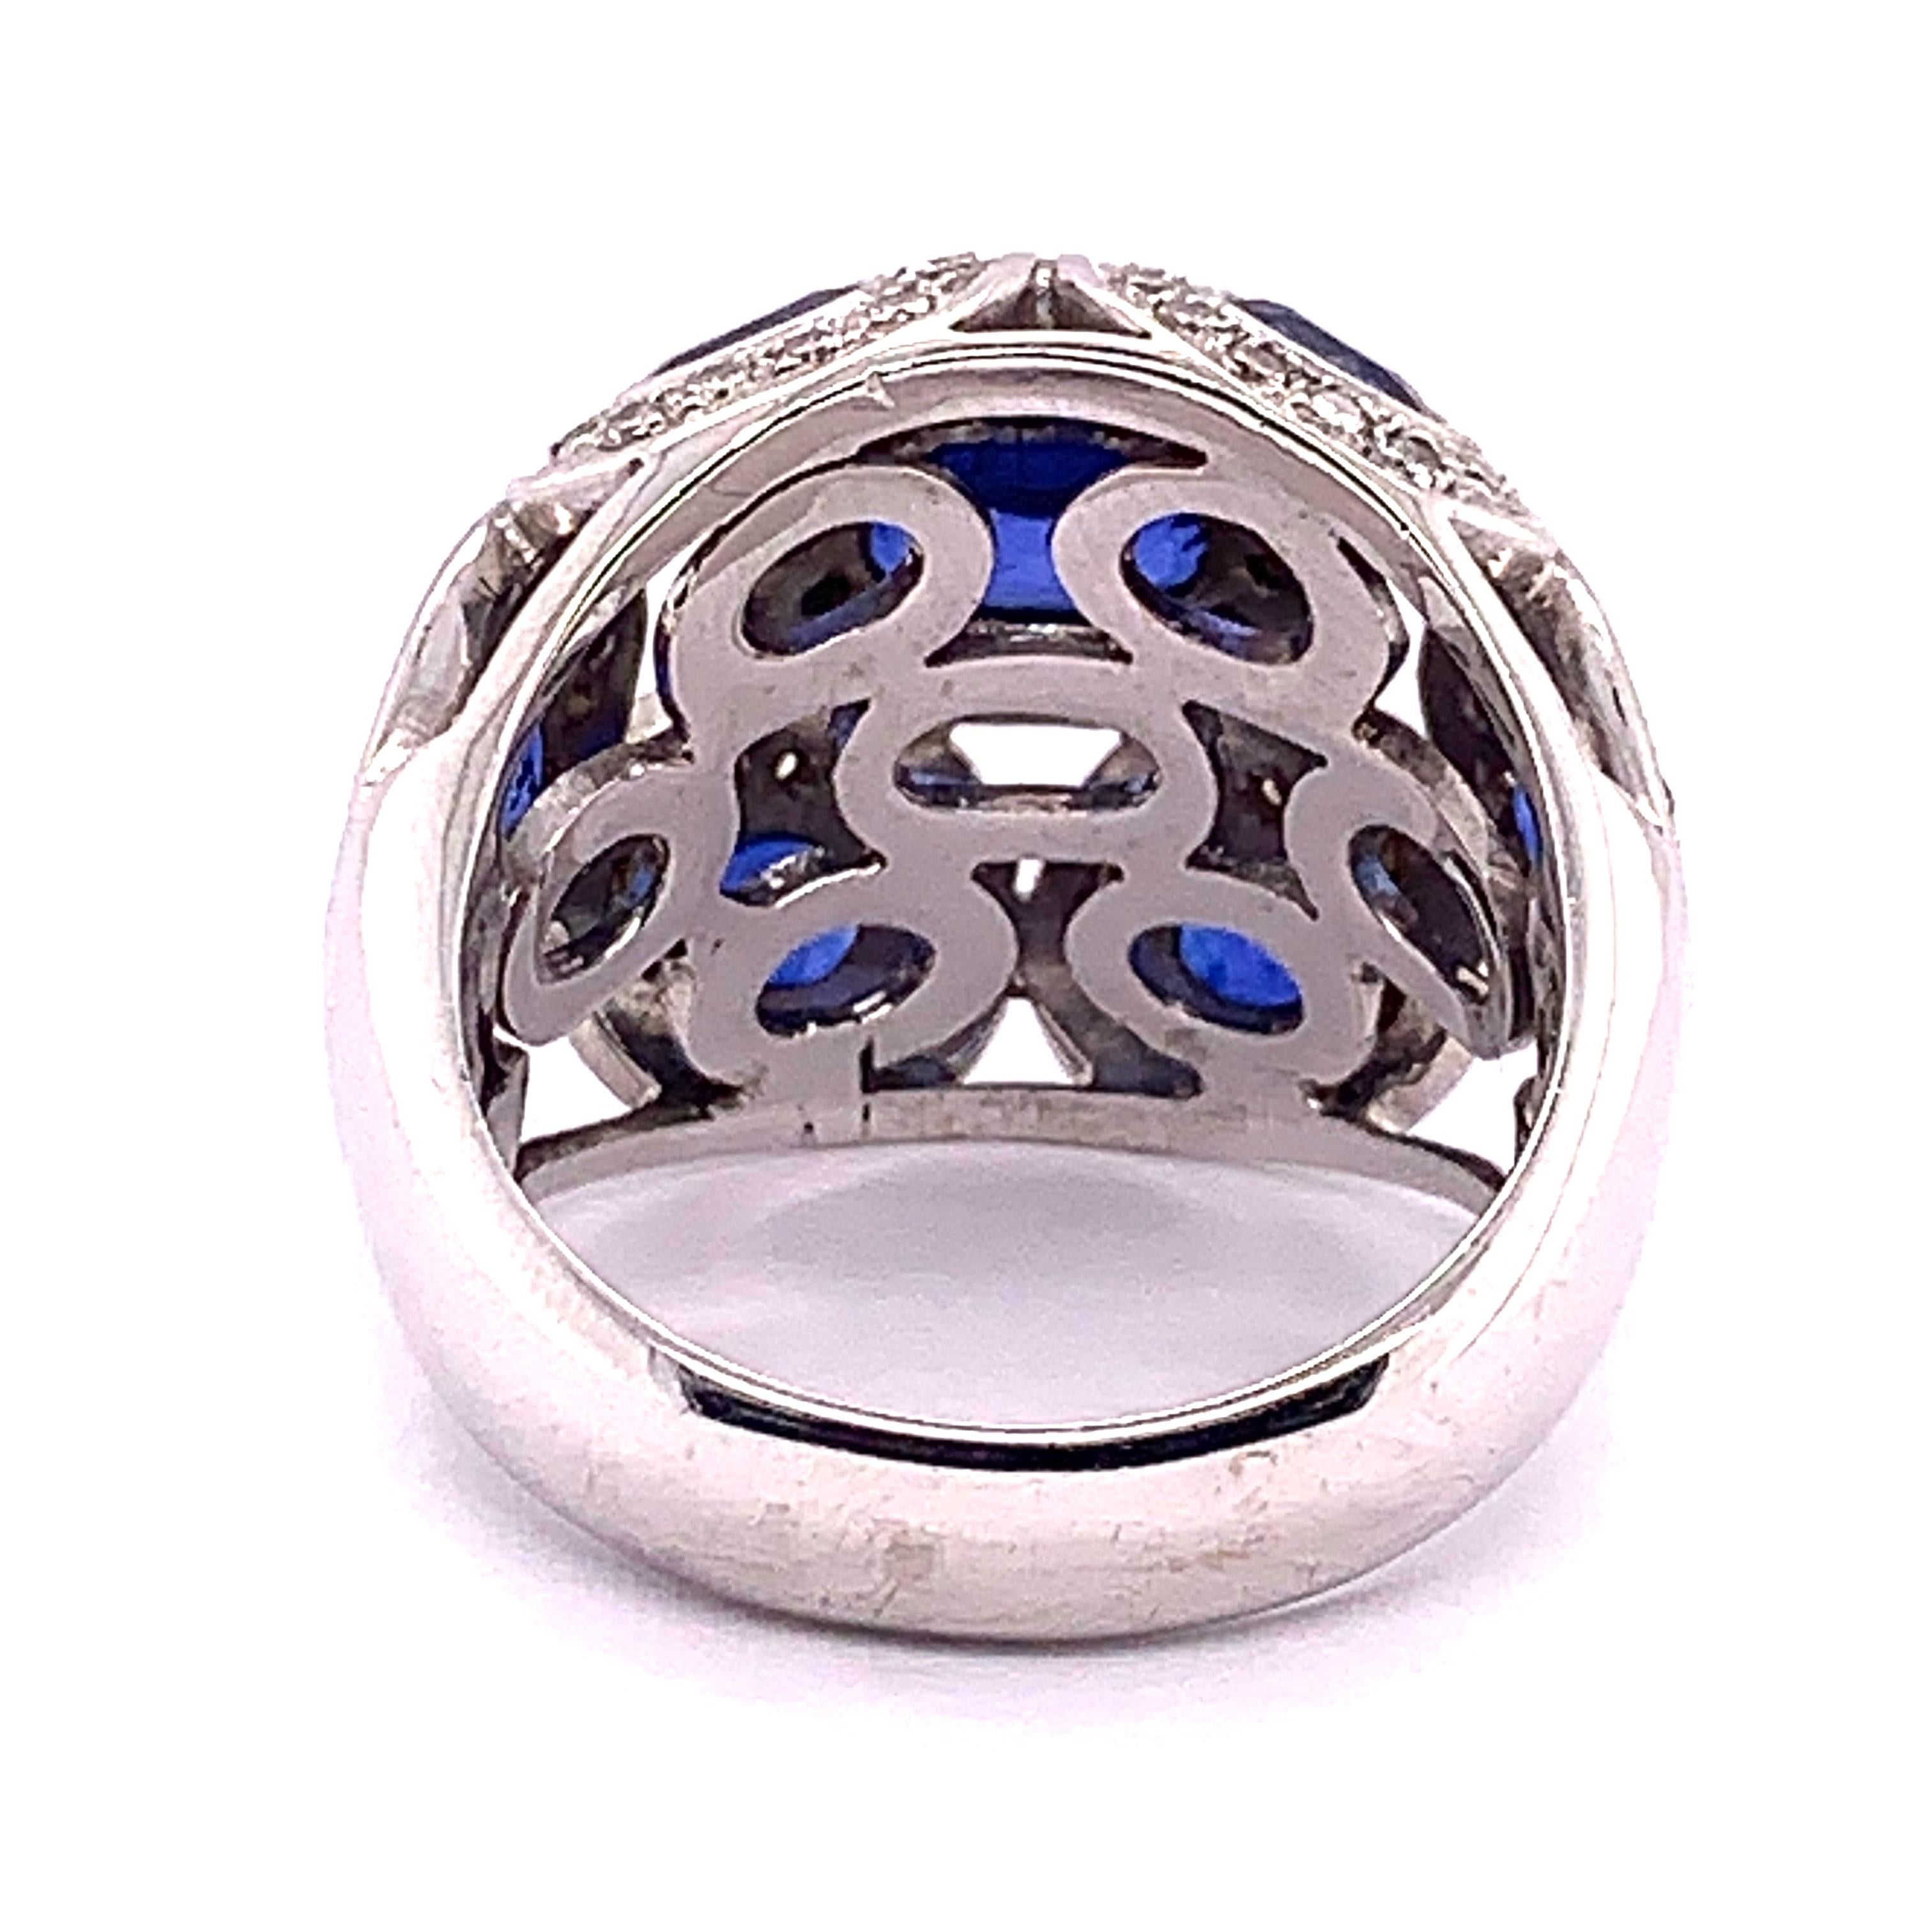 Oval Cut 4.63 Carat Blue Oval Sapphire and Diamond Ring